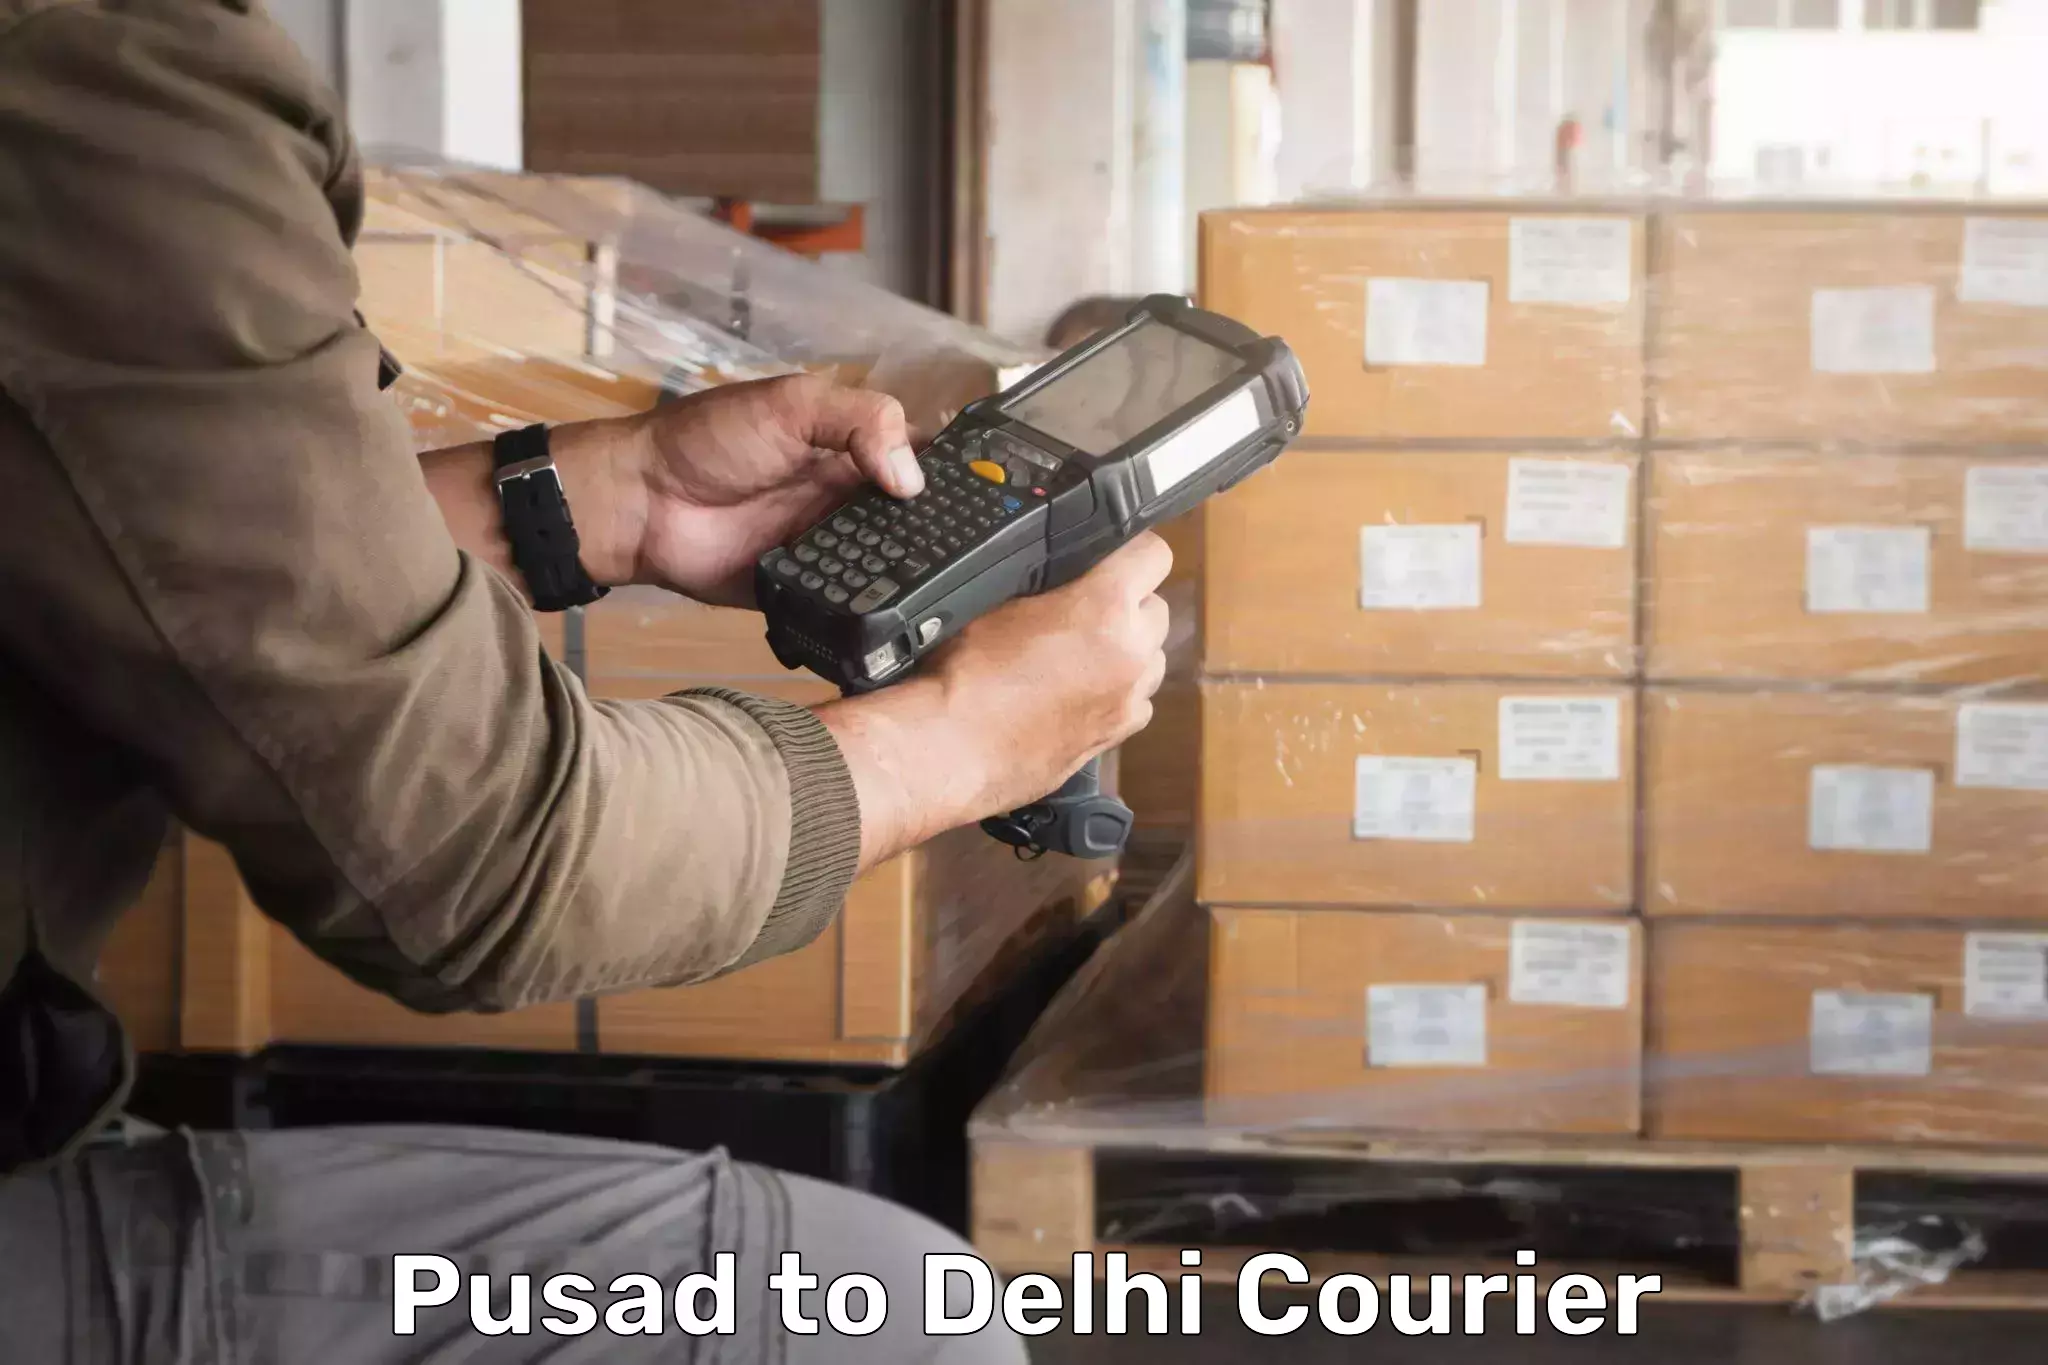 Urban courier service Pusad to NCR